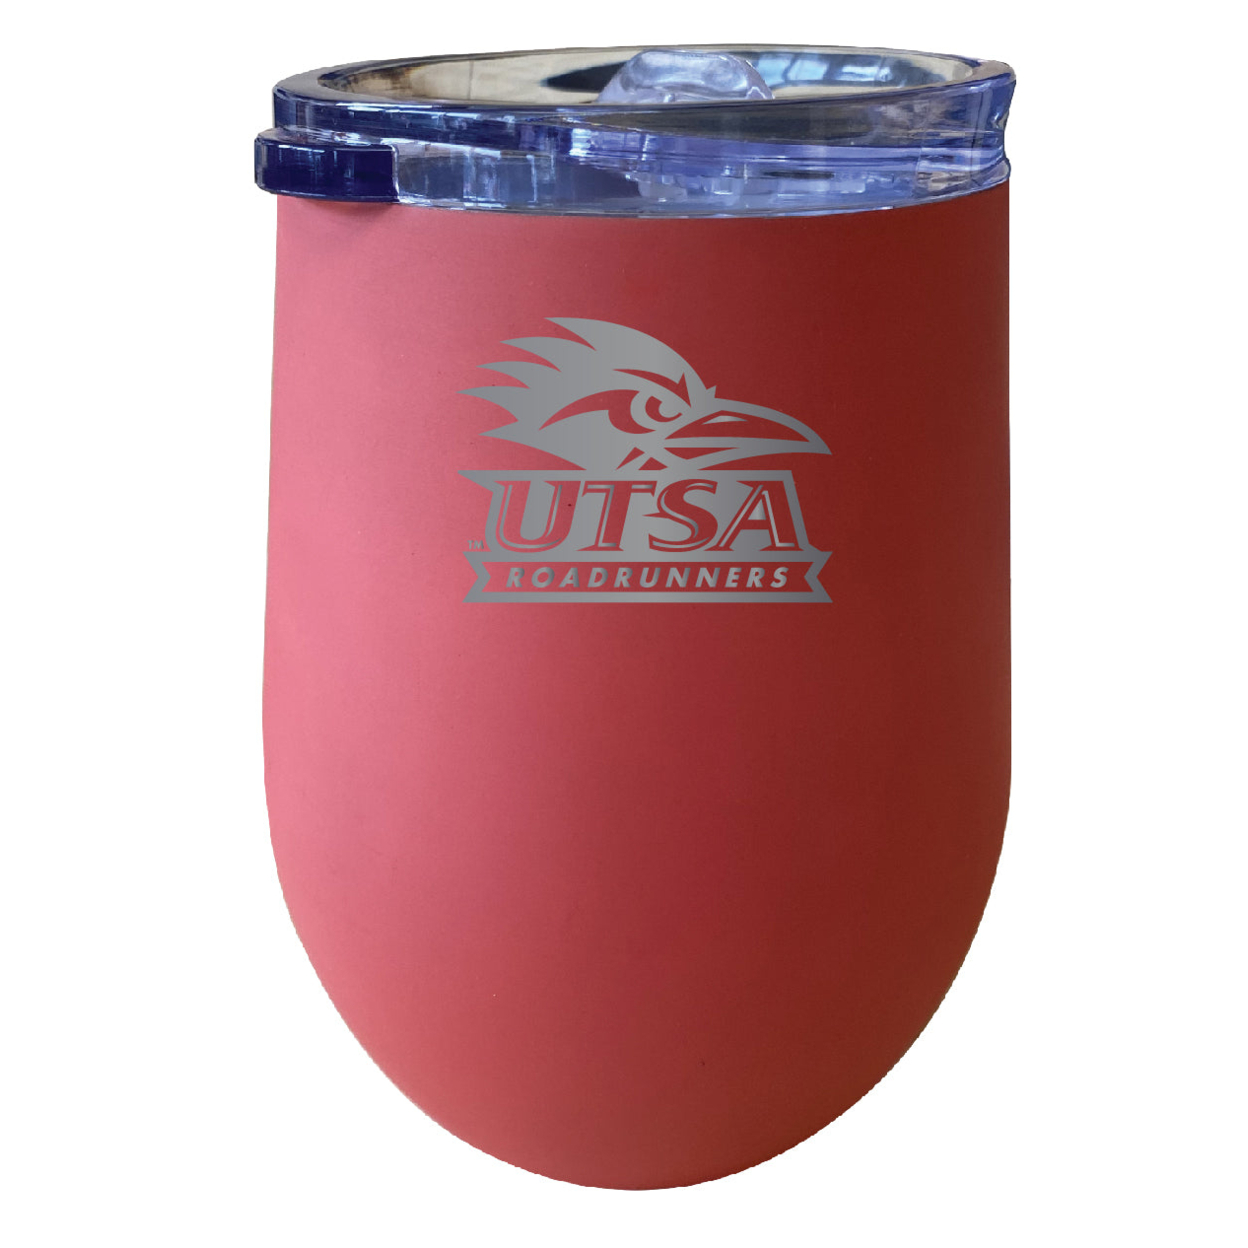 UTSA Road Runners 12 Oz Etched Insulated Wine Stainless Steel Tumbler - Choose Your Color - Seafoam